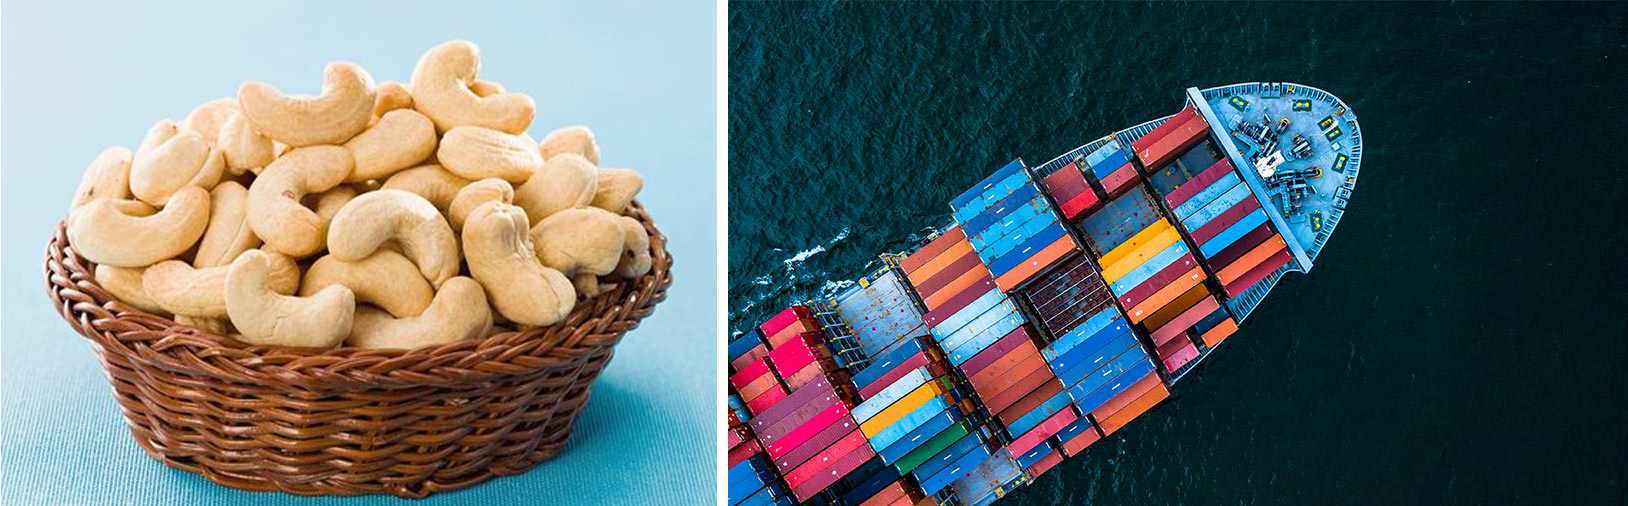 Exporting cashew nut kernels from Vietnam is 0% export tax as regulated by decree 125 of the Government and the price of cashew nuts is among the lowest.